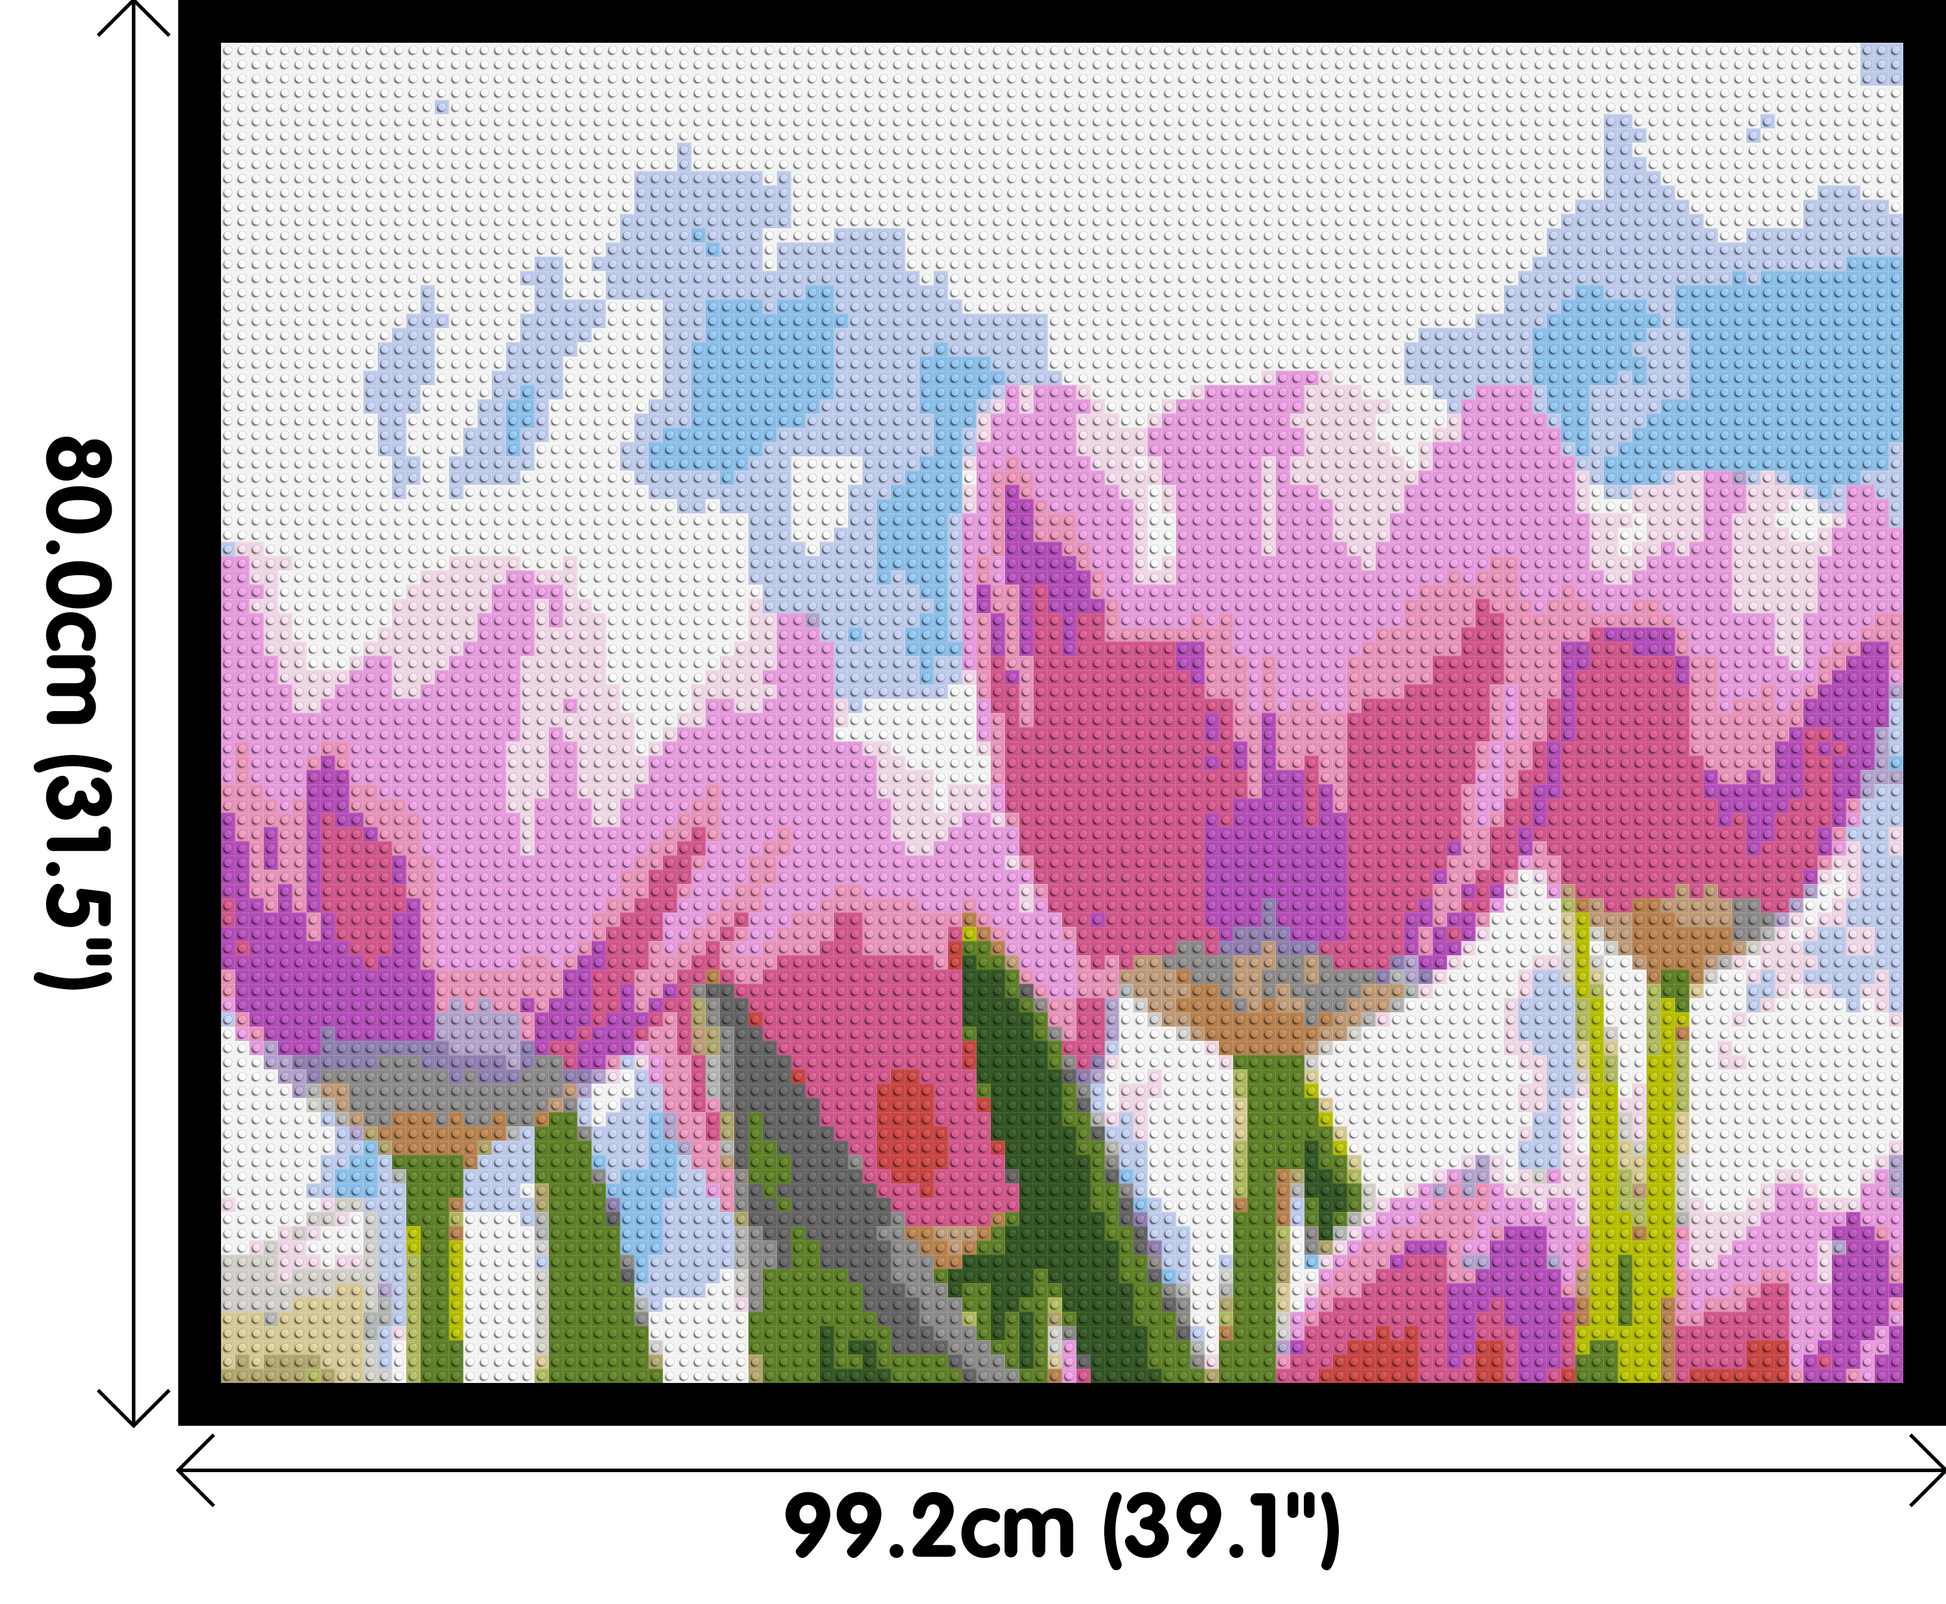 Pink Tulips - Brick Art Mosaic Kit 5x4 dimensions with frame